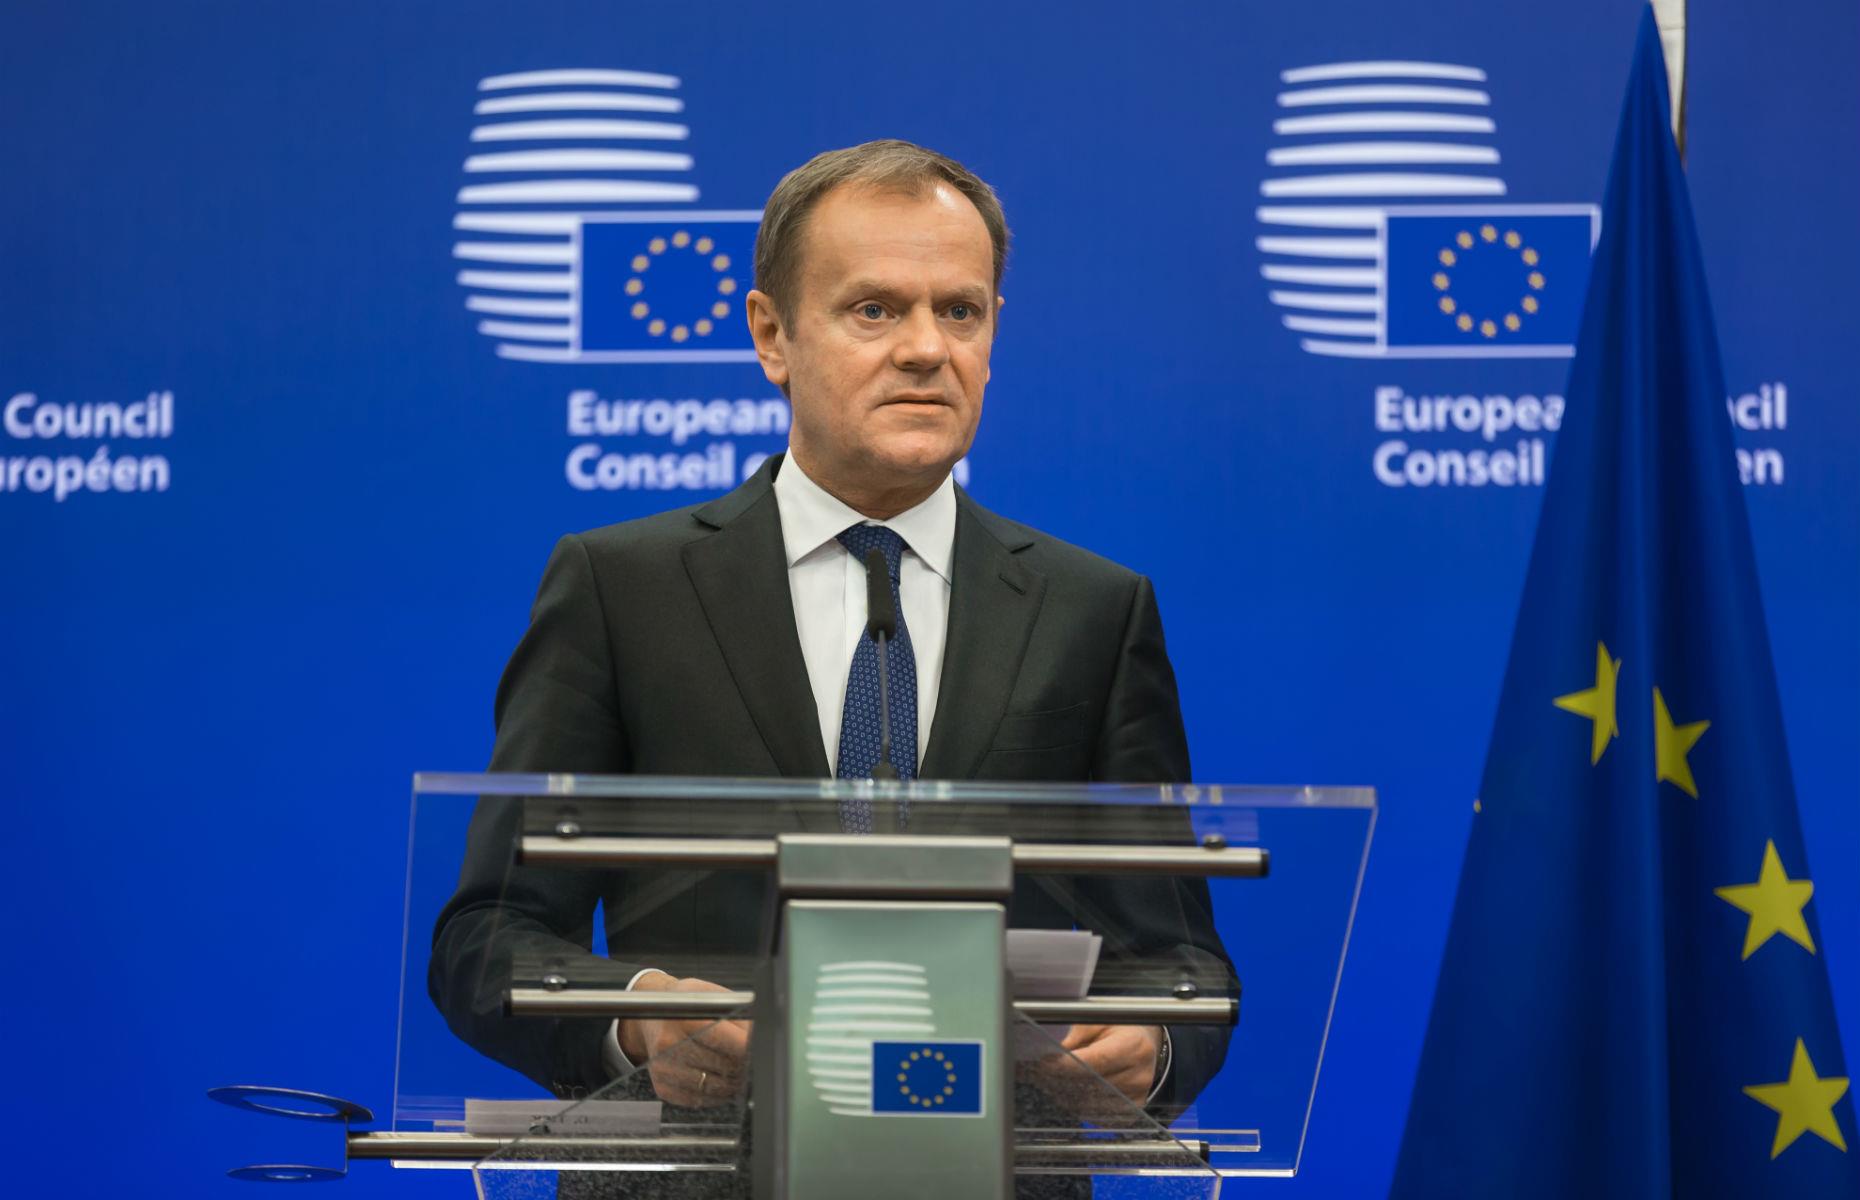 Donald Tusk, former president of the European Council: Chimney painter 